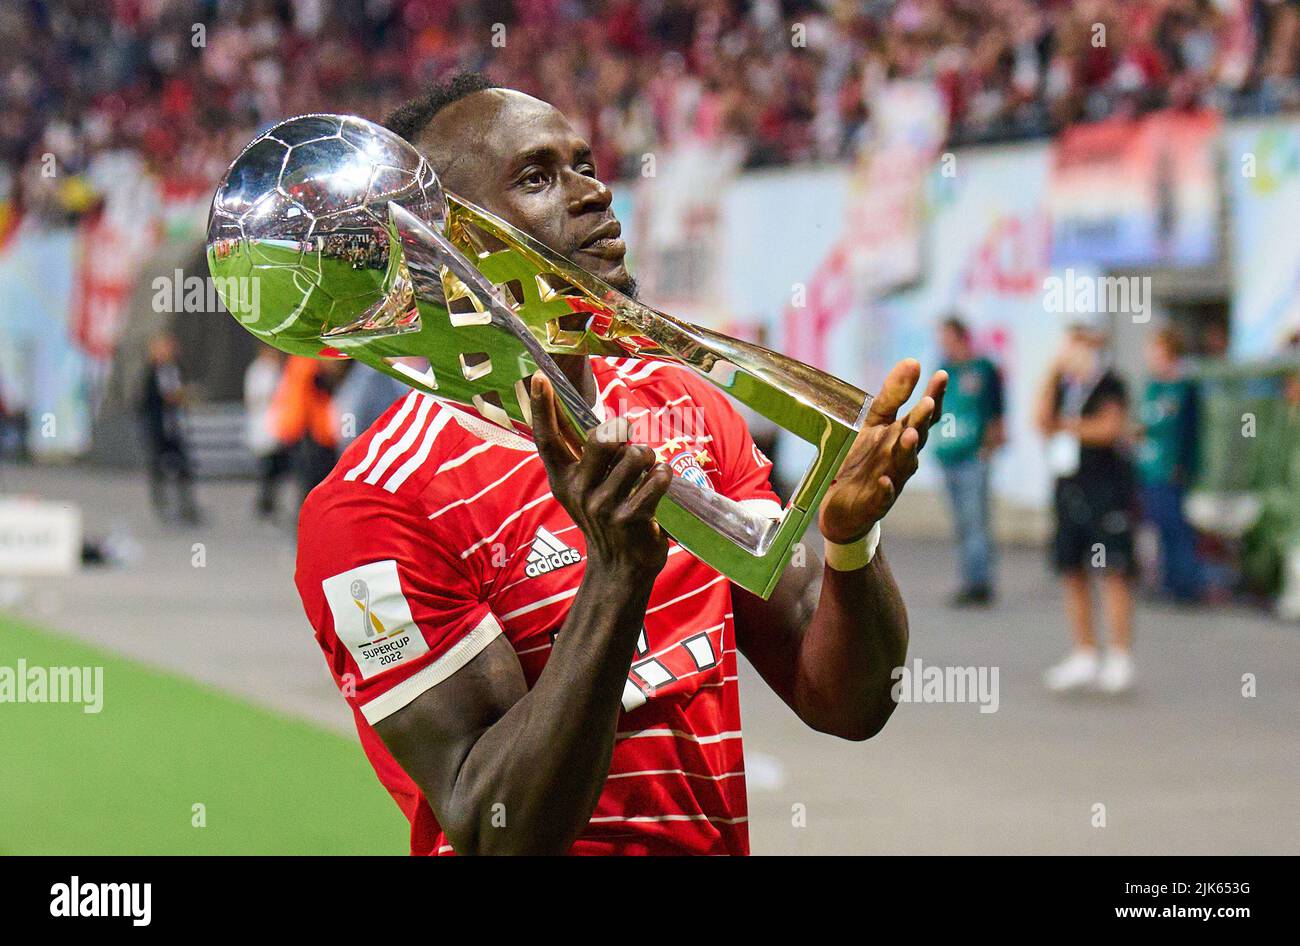 Leipzig, Germany. 30th July, 2022. Sadio Mane (FCB 17)   at winner ceremony with team mates after the match RB LEIPZIG - FC BAYERN MÜNCHEN 3-5 DFL SUPERCUP, 1. German Football League,  in Leipzig, July 30, 2022  Season 2022/2023 © Peter Schatz / Alamy Live News Credit: Peter Schatz/Alamy Live News Stock Photo